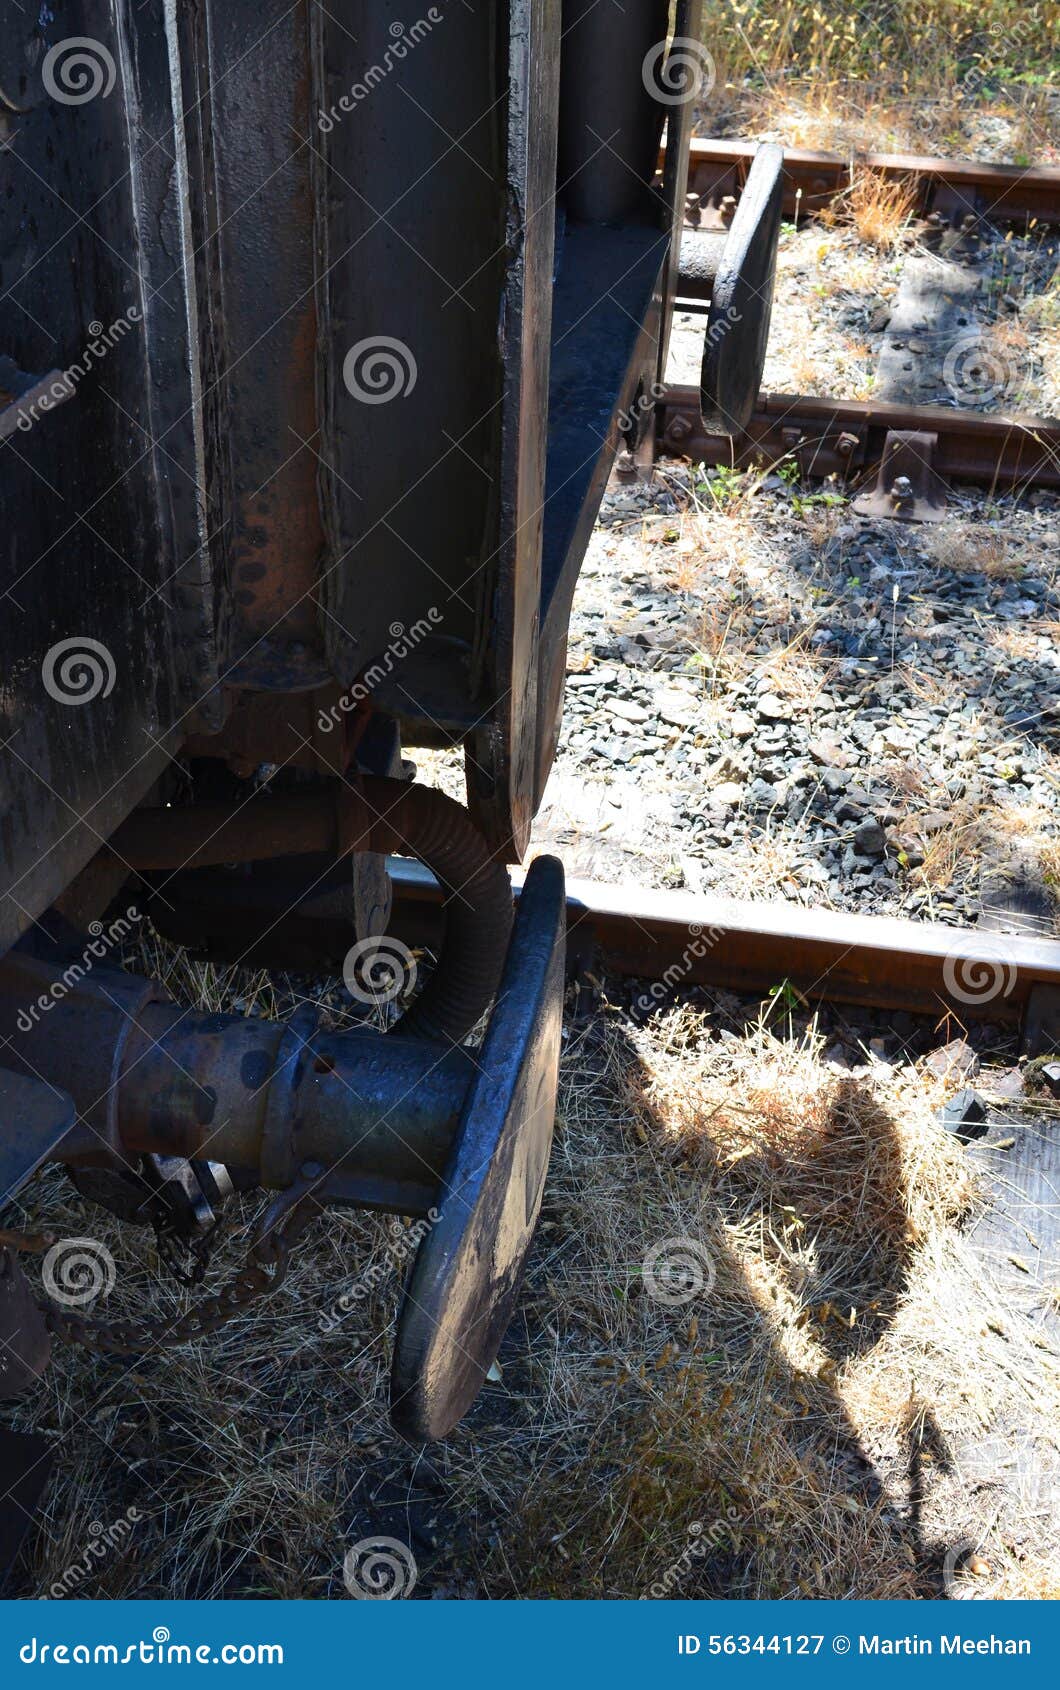 train carriage buffers and couplings.